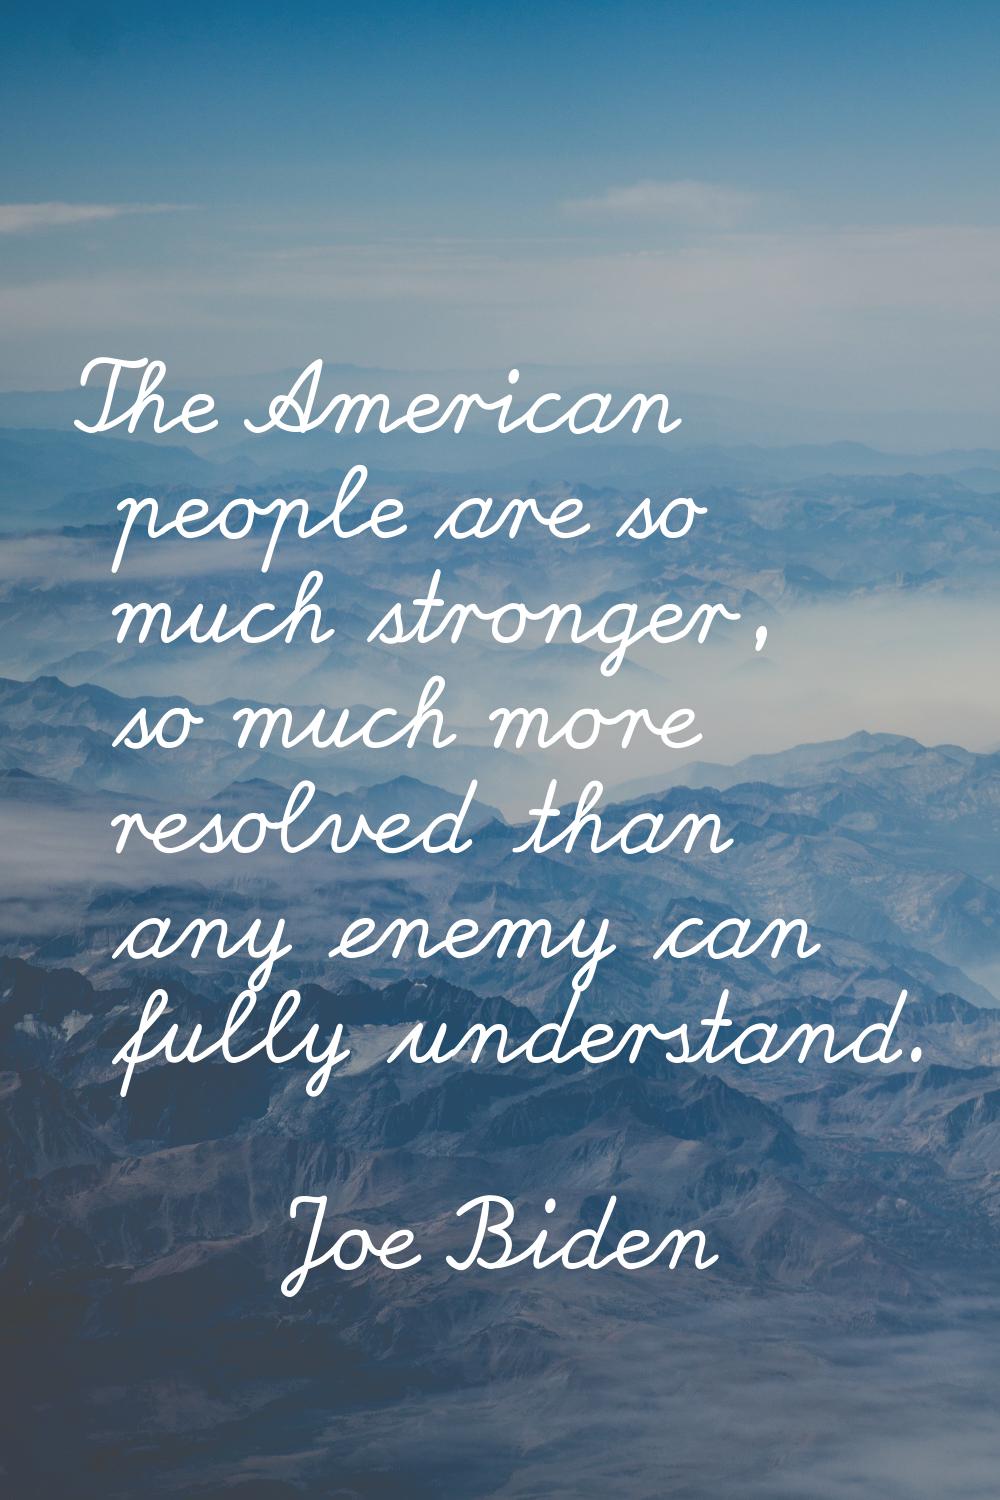 The American people are so much stronger, so much more resolved than any enemy can fully understand